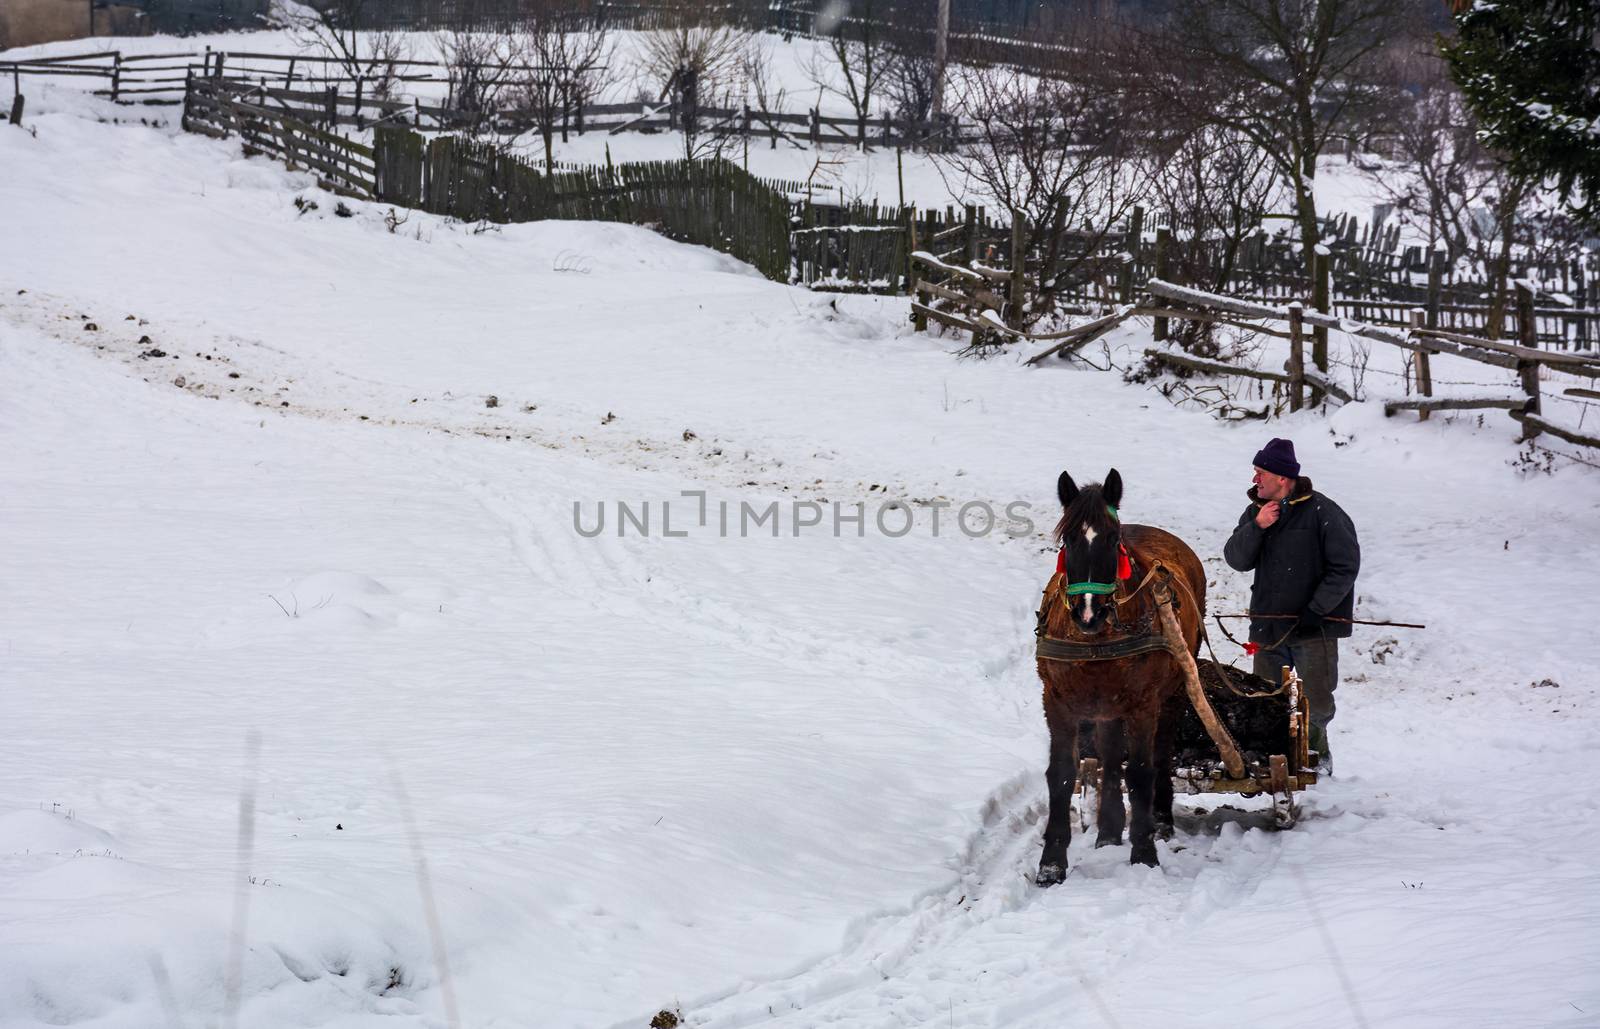 Volovets, Ukraine - December 12, 2016: transportation of manure in winter. man riding a horse sledge on snowy road along the wooden fence